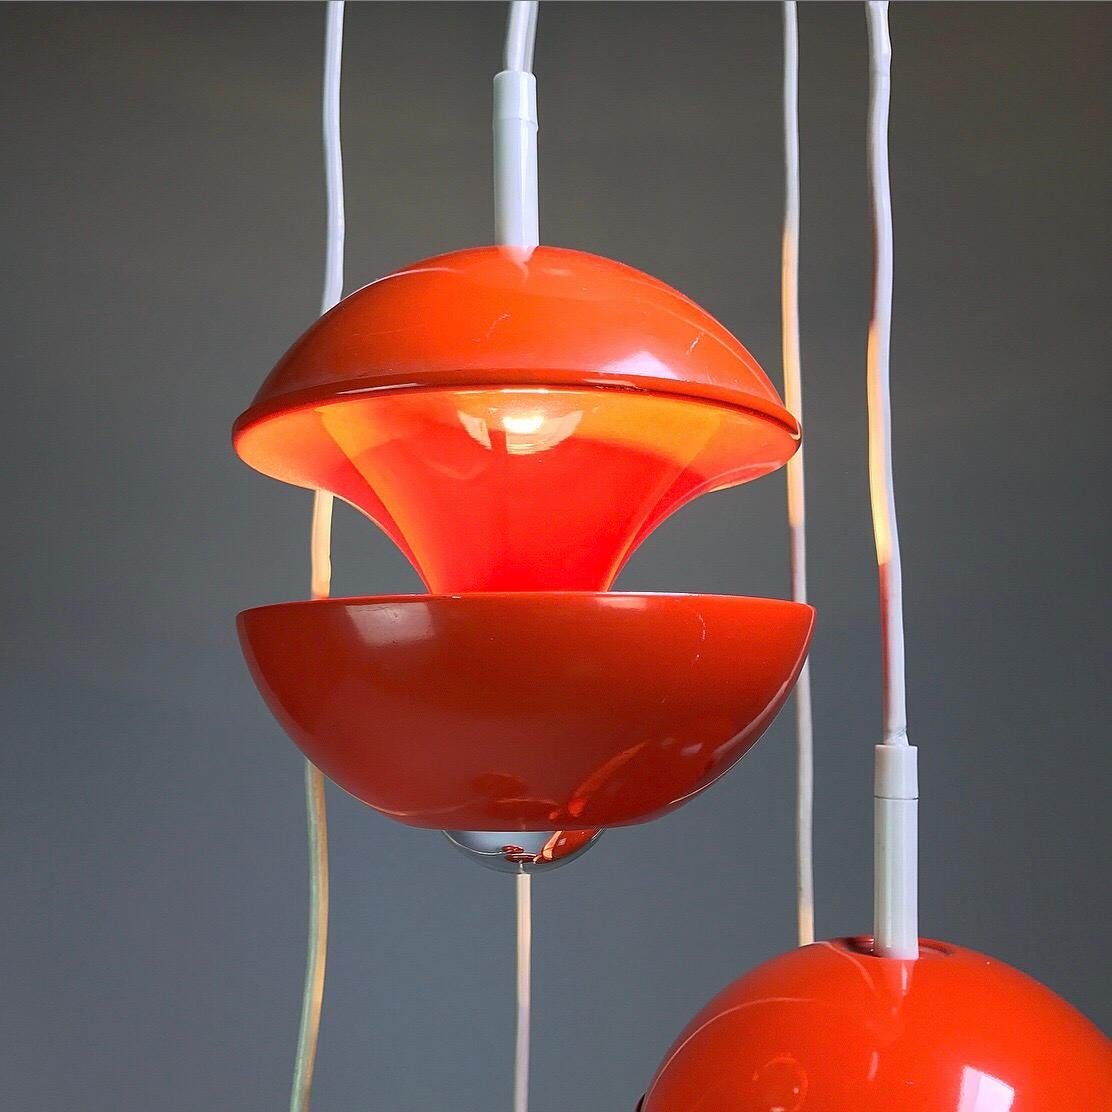 Mid-20th Century Space age chandelier by Klaus Hempel for Kaiser Leuchten, Germany 1972.